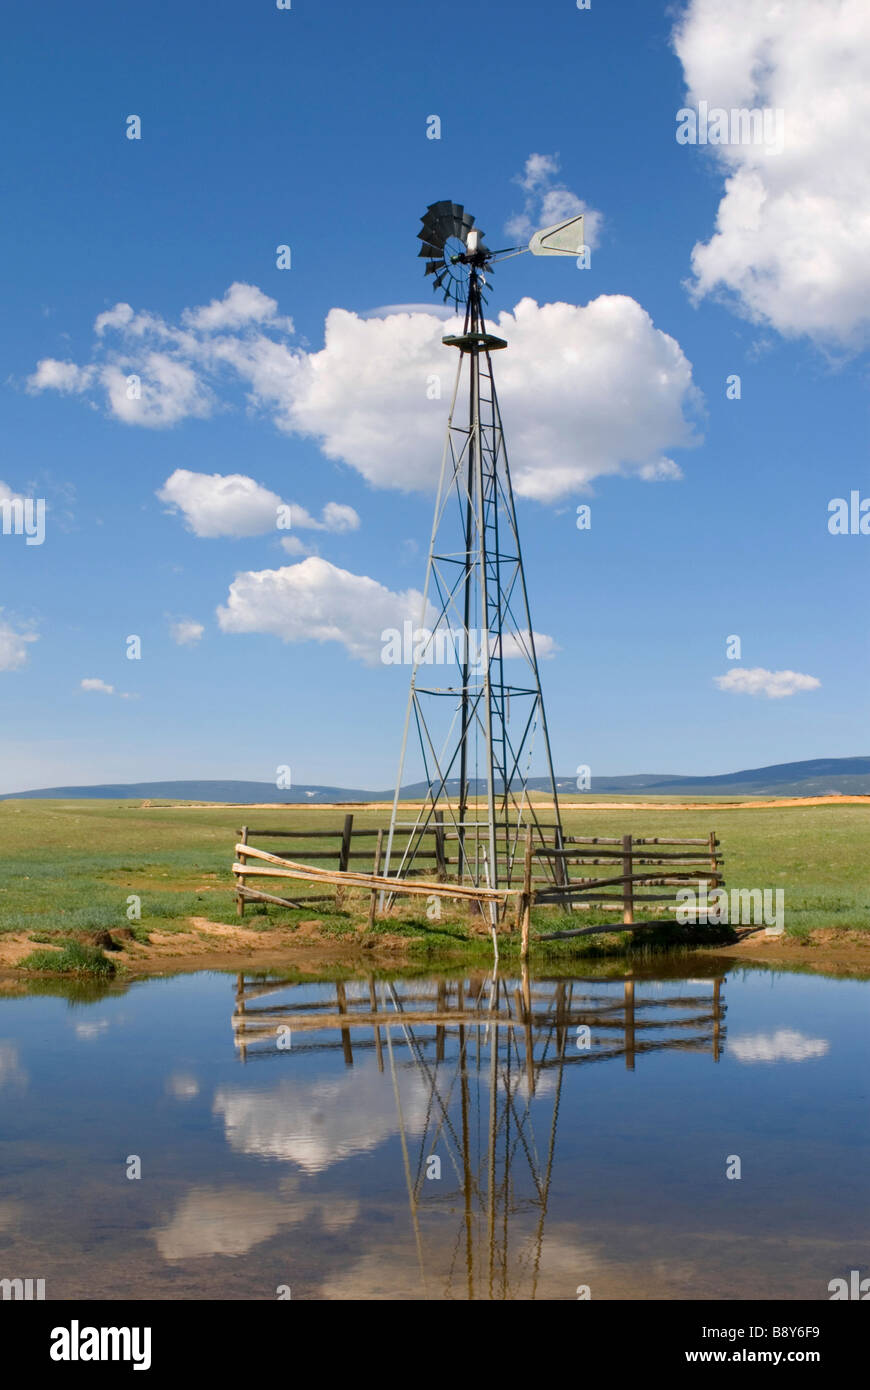 Reflection of an industrial windmill in water, Wyoming, USA Stock Photo